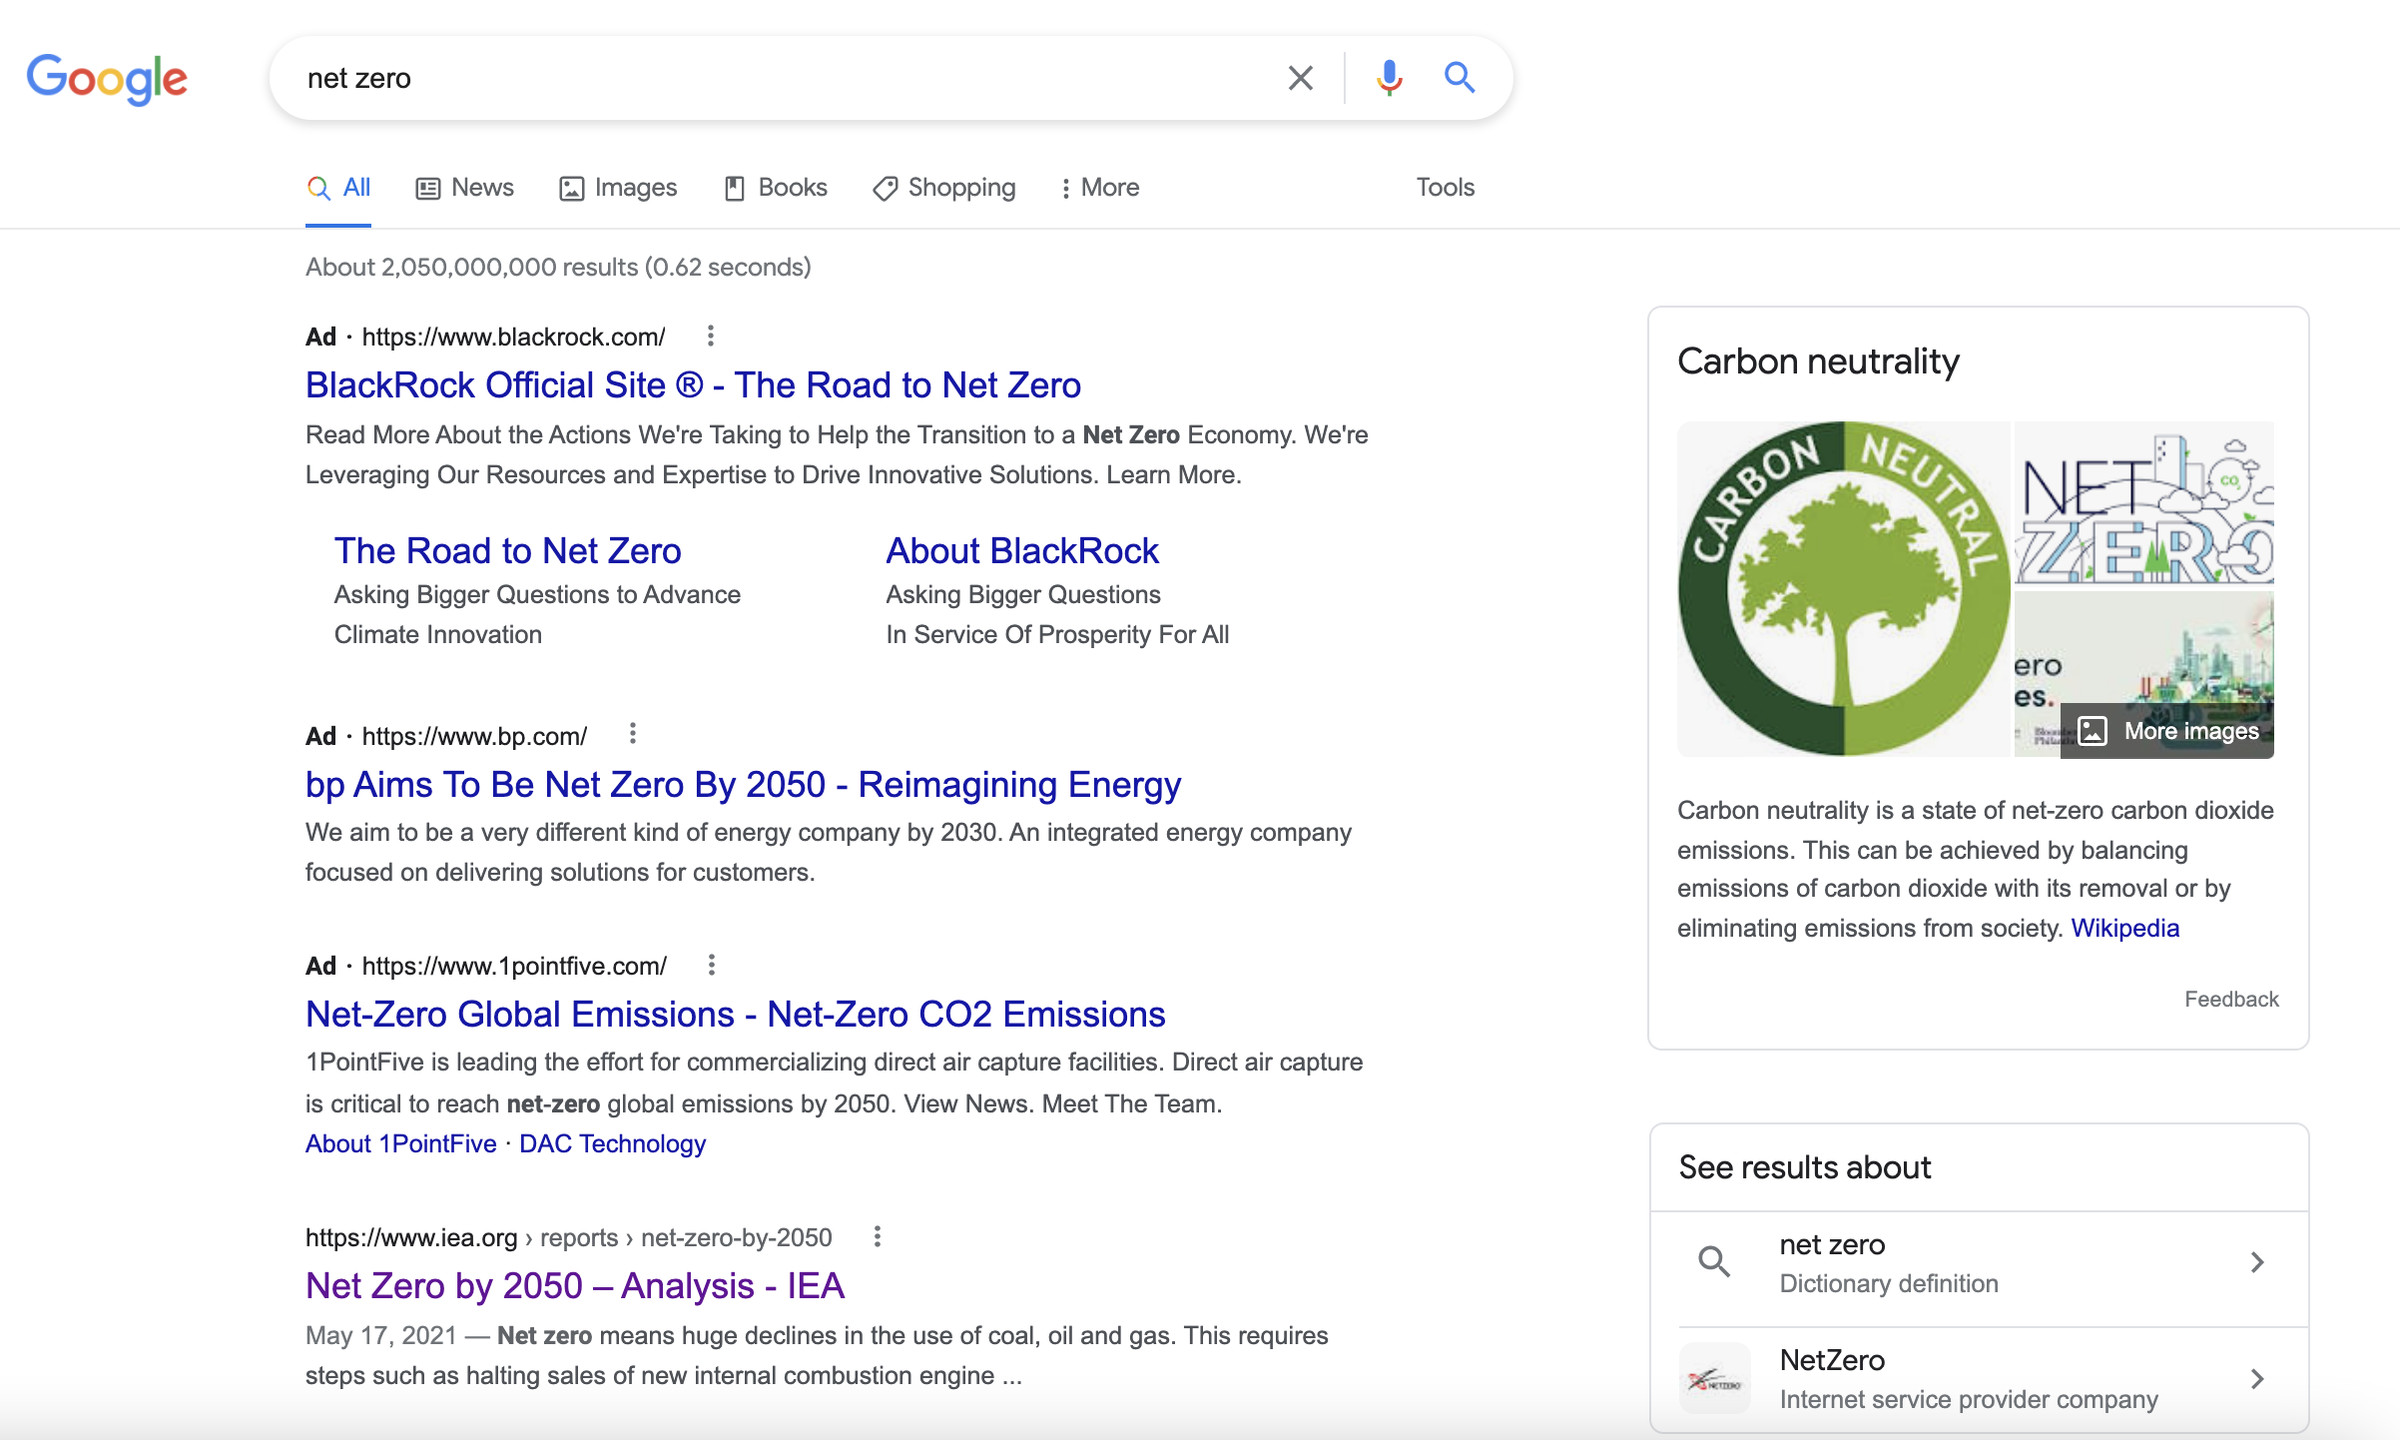 A screenshot taken of Google Search results for “net zero” on Thursday, January 6.